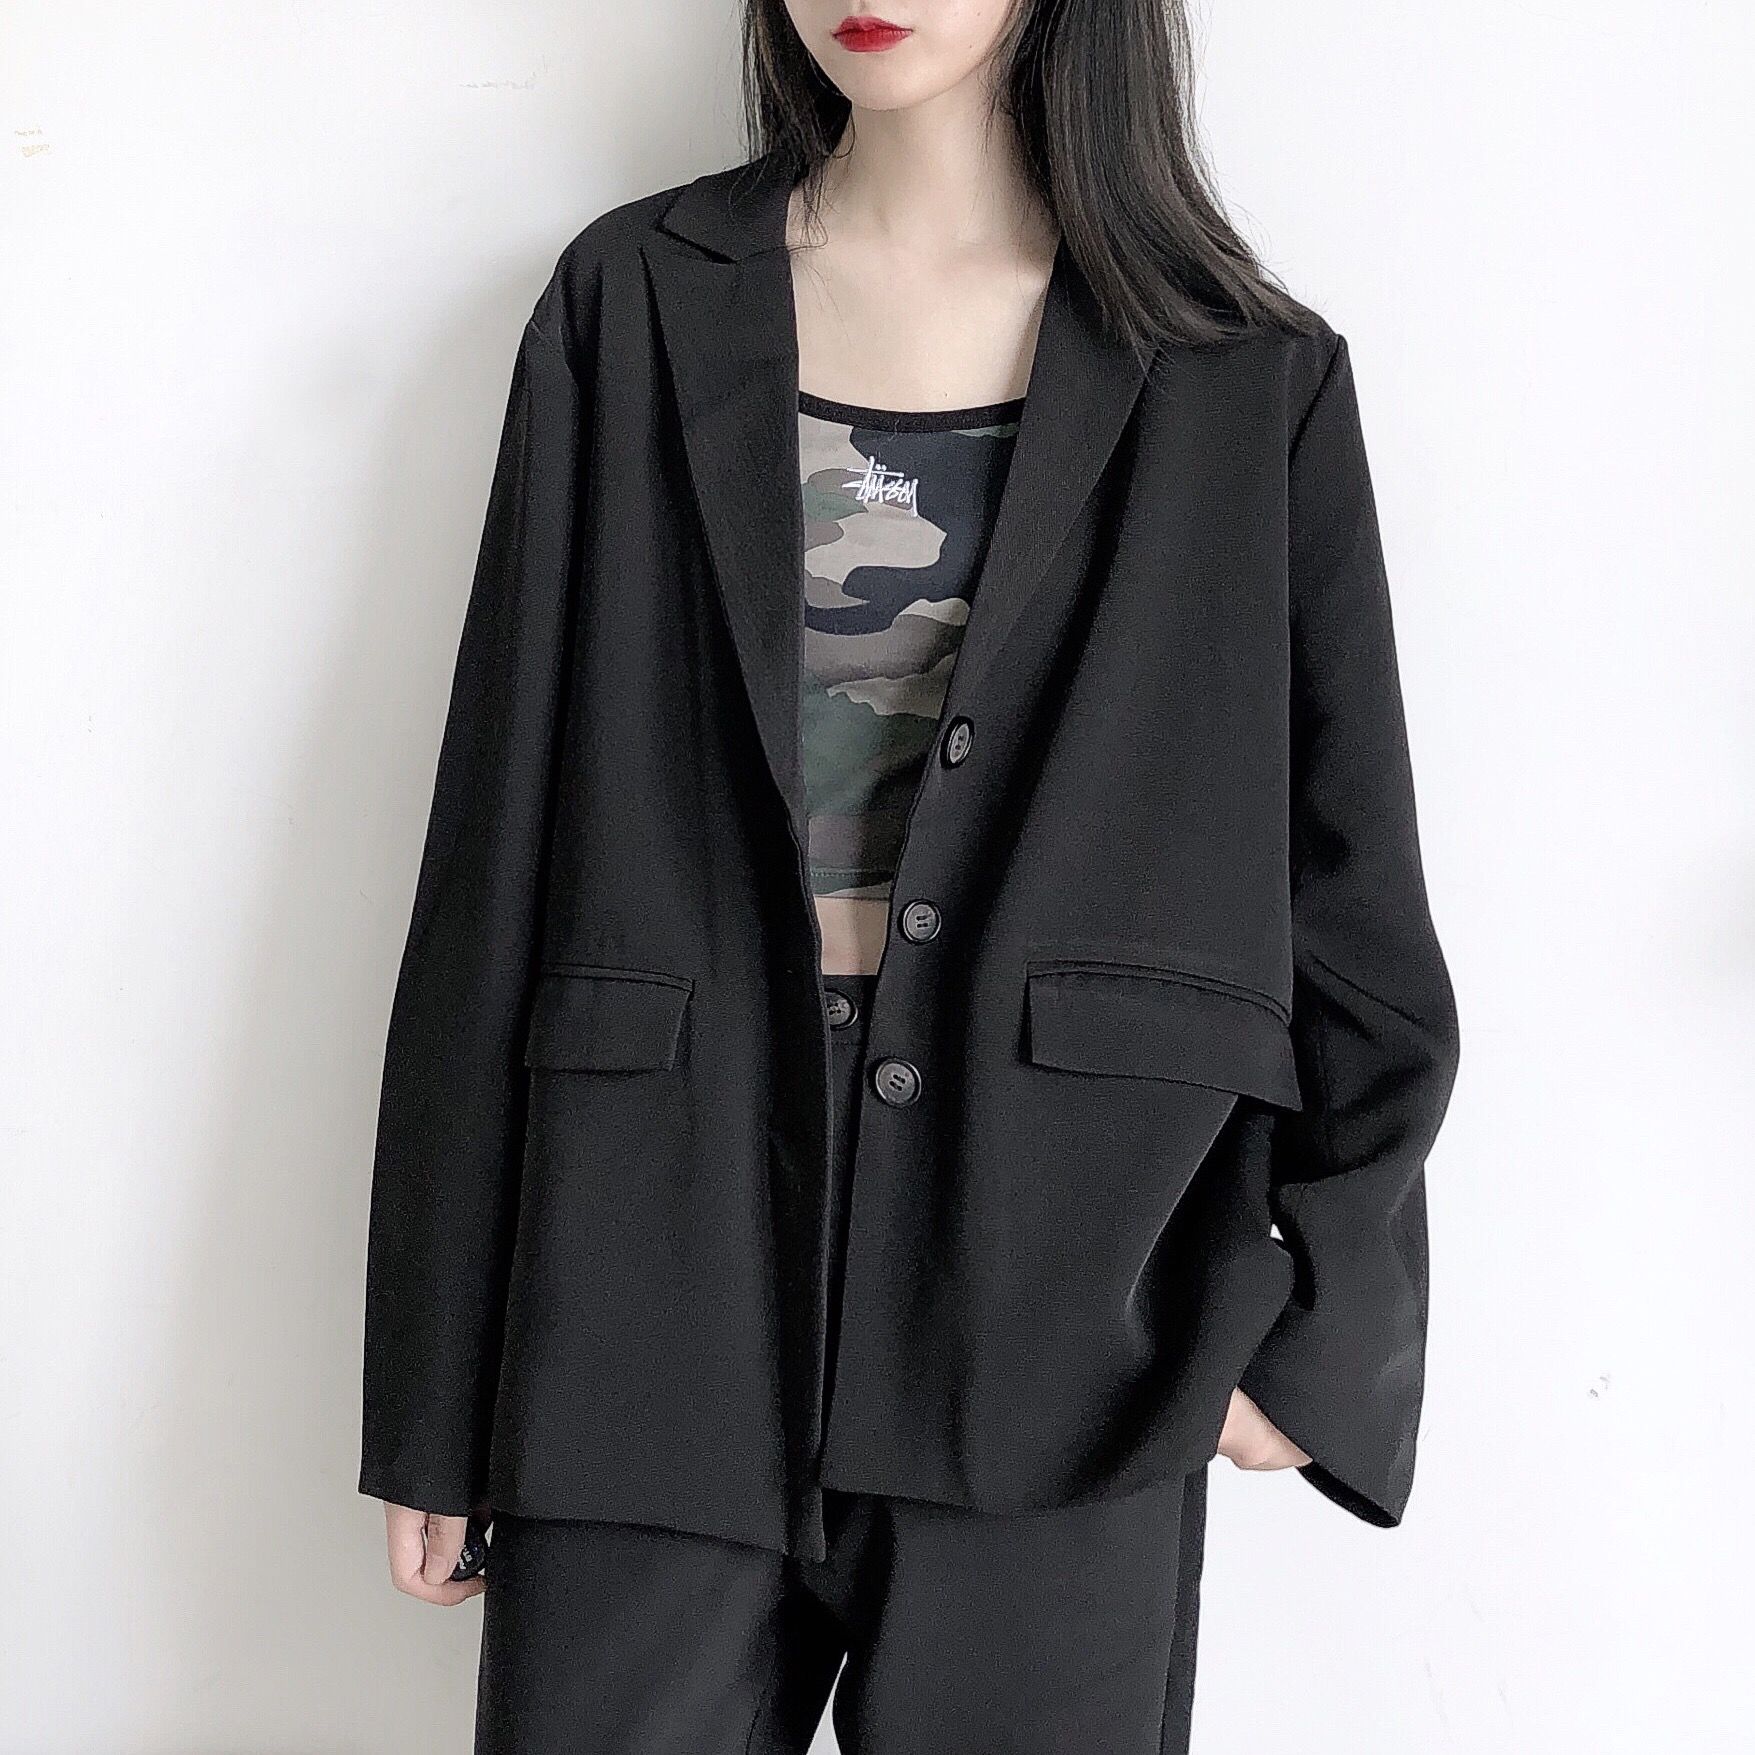 Fall 2020 new small suit coat British style Korean loose casual female student suit top fashion